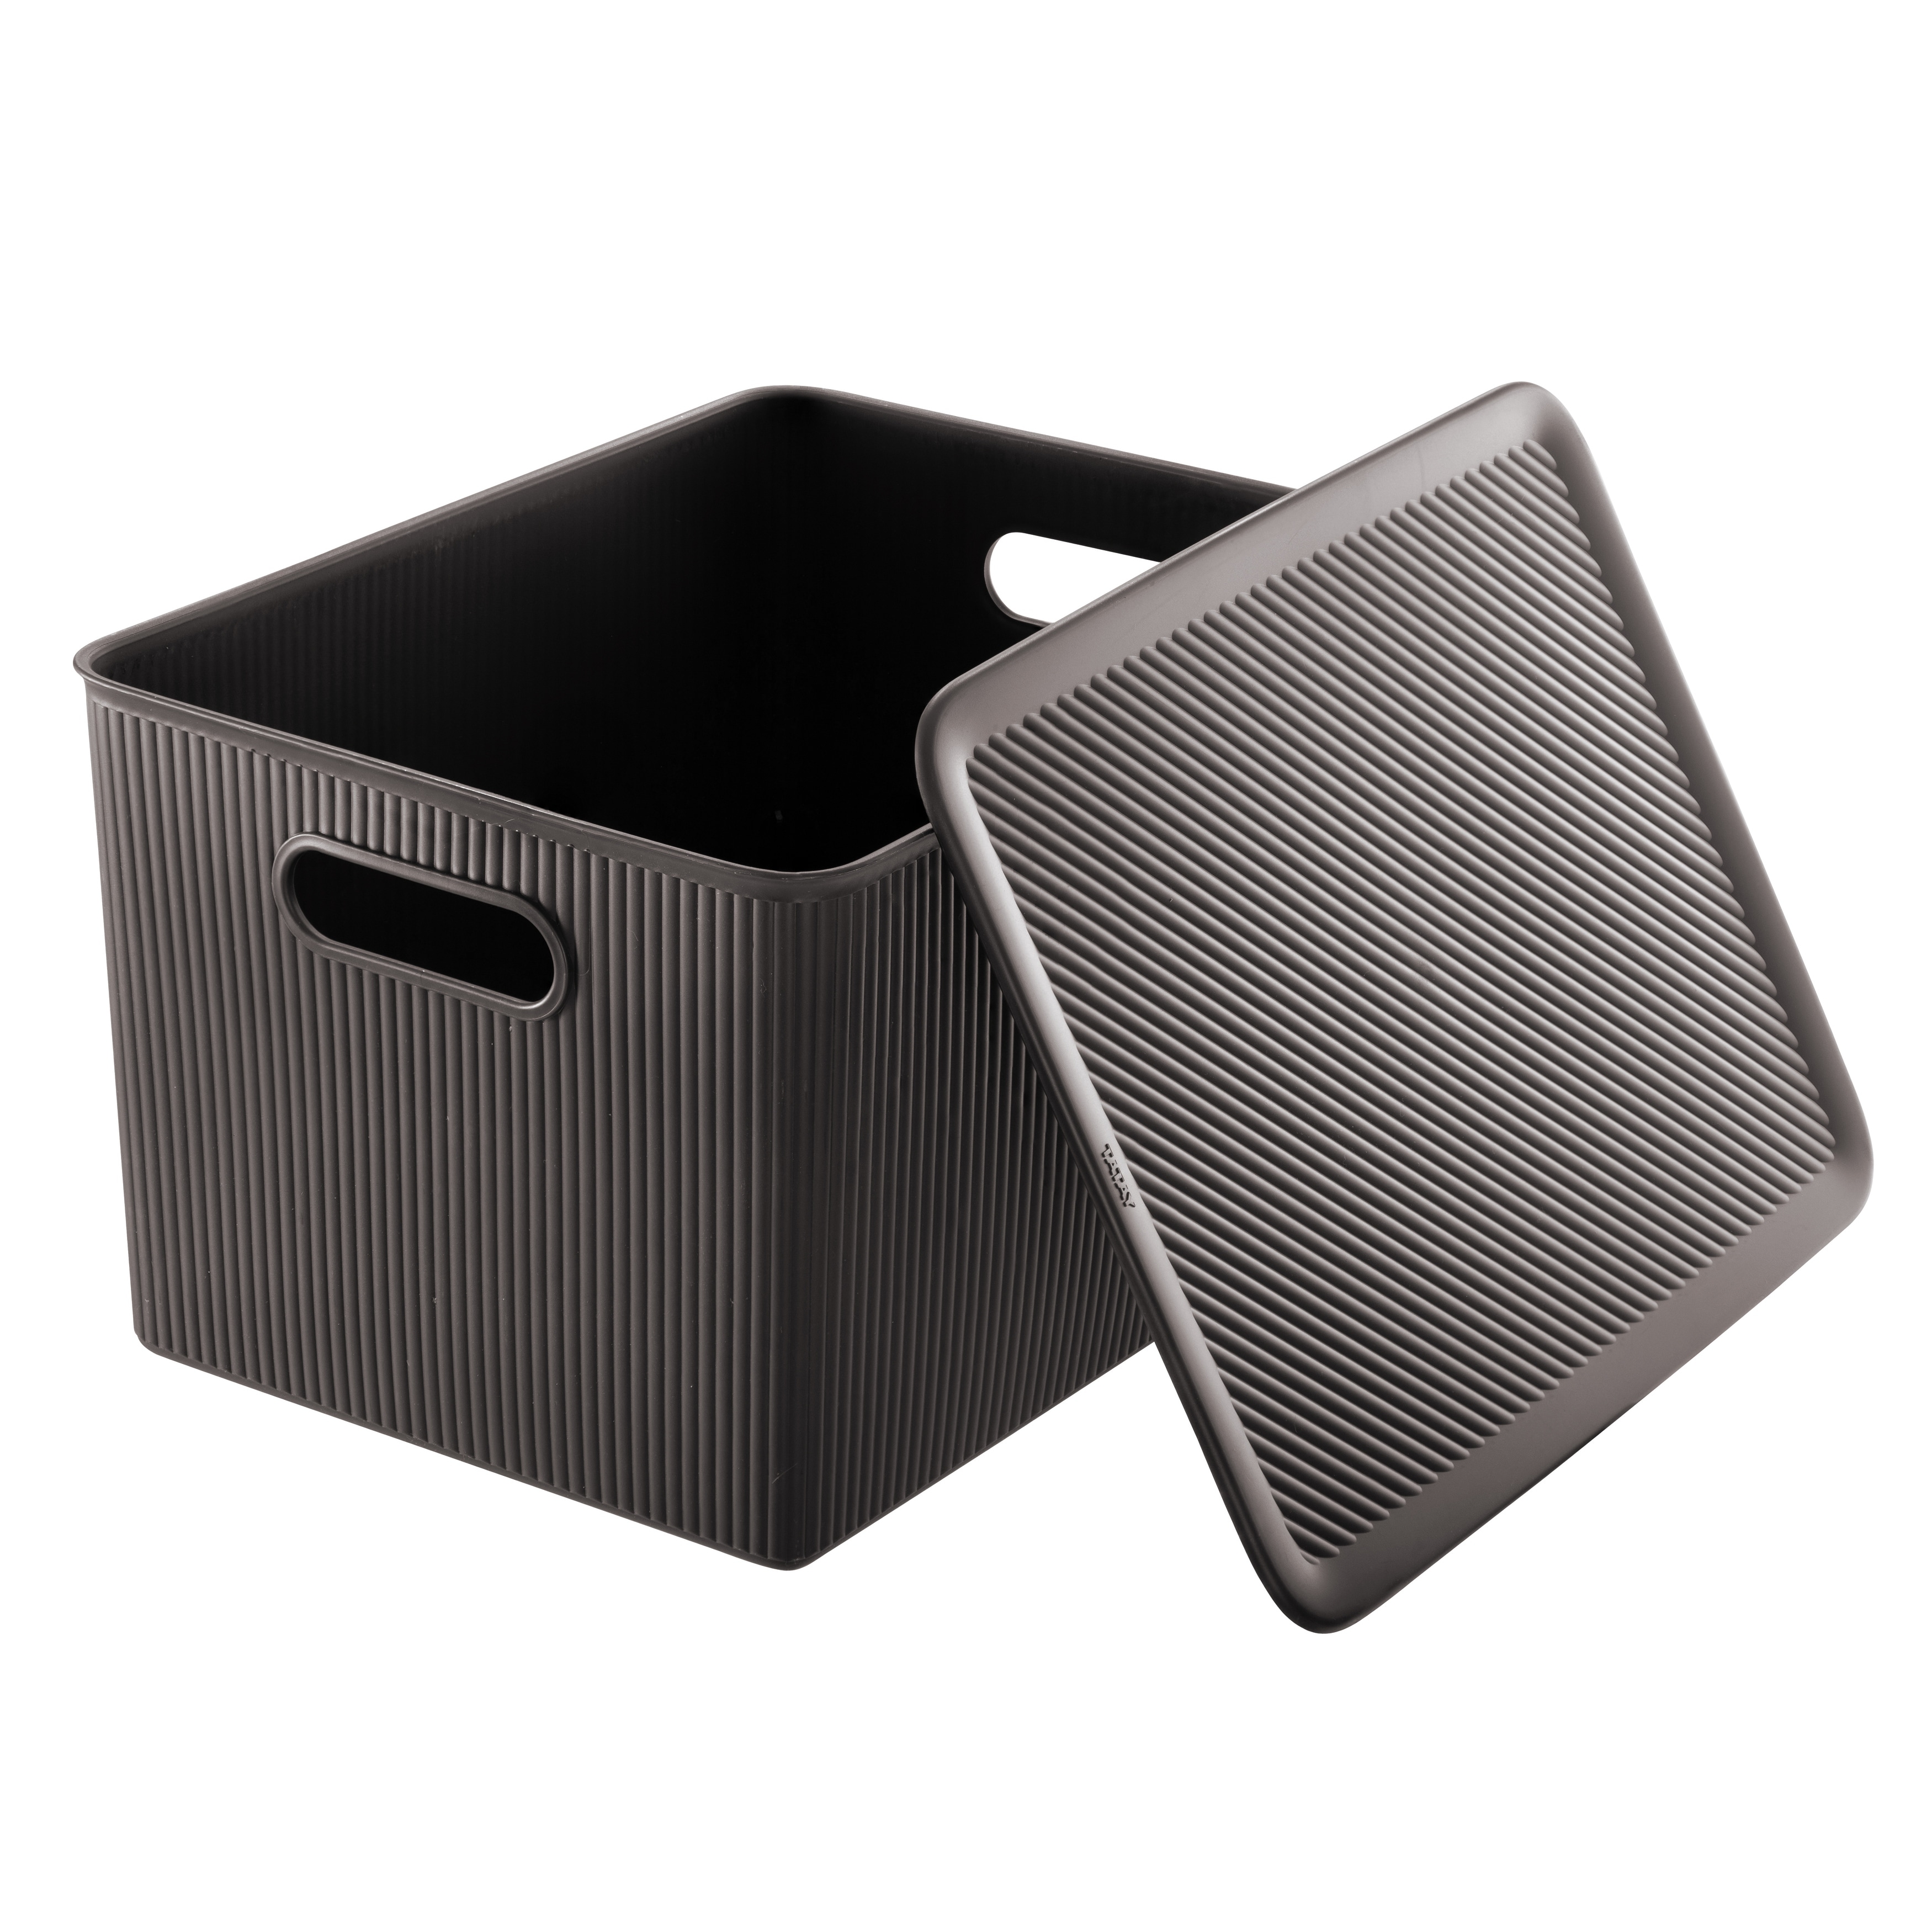 https://ak1.ostkcdn.com/images/products/is/images/direct/39f736ff3f5981b761fef67496137b6898ea21e4/Superio-Ribbed-Storage-Bin-with-Matching-Lid.jpg